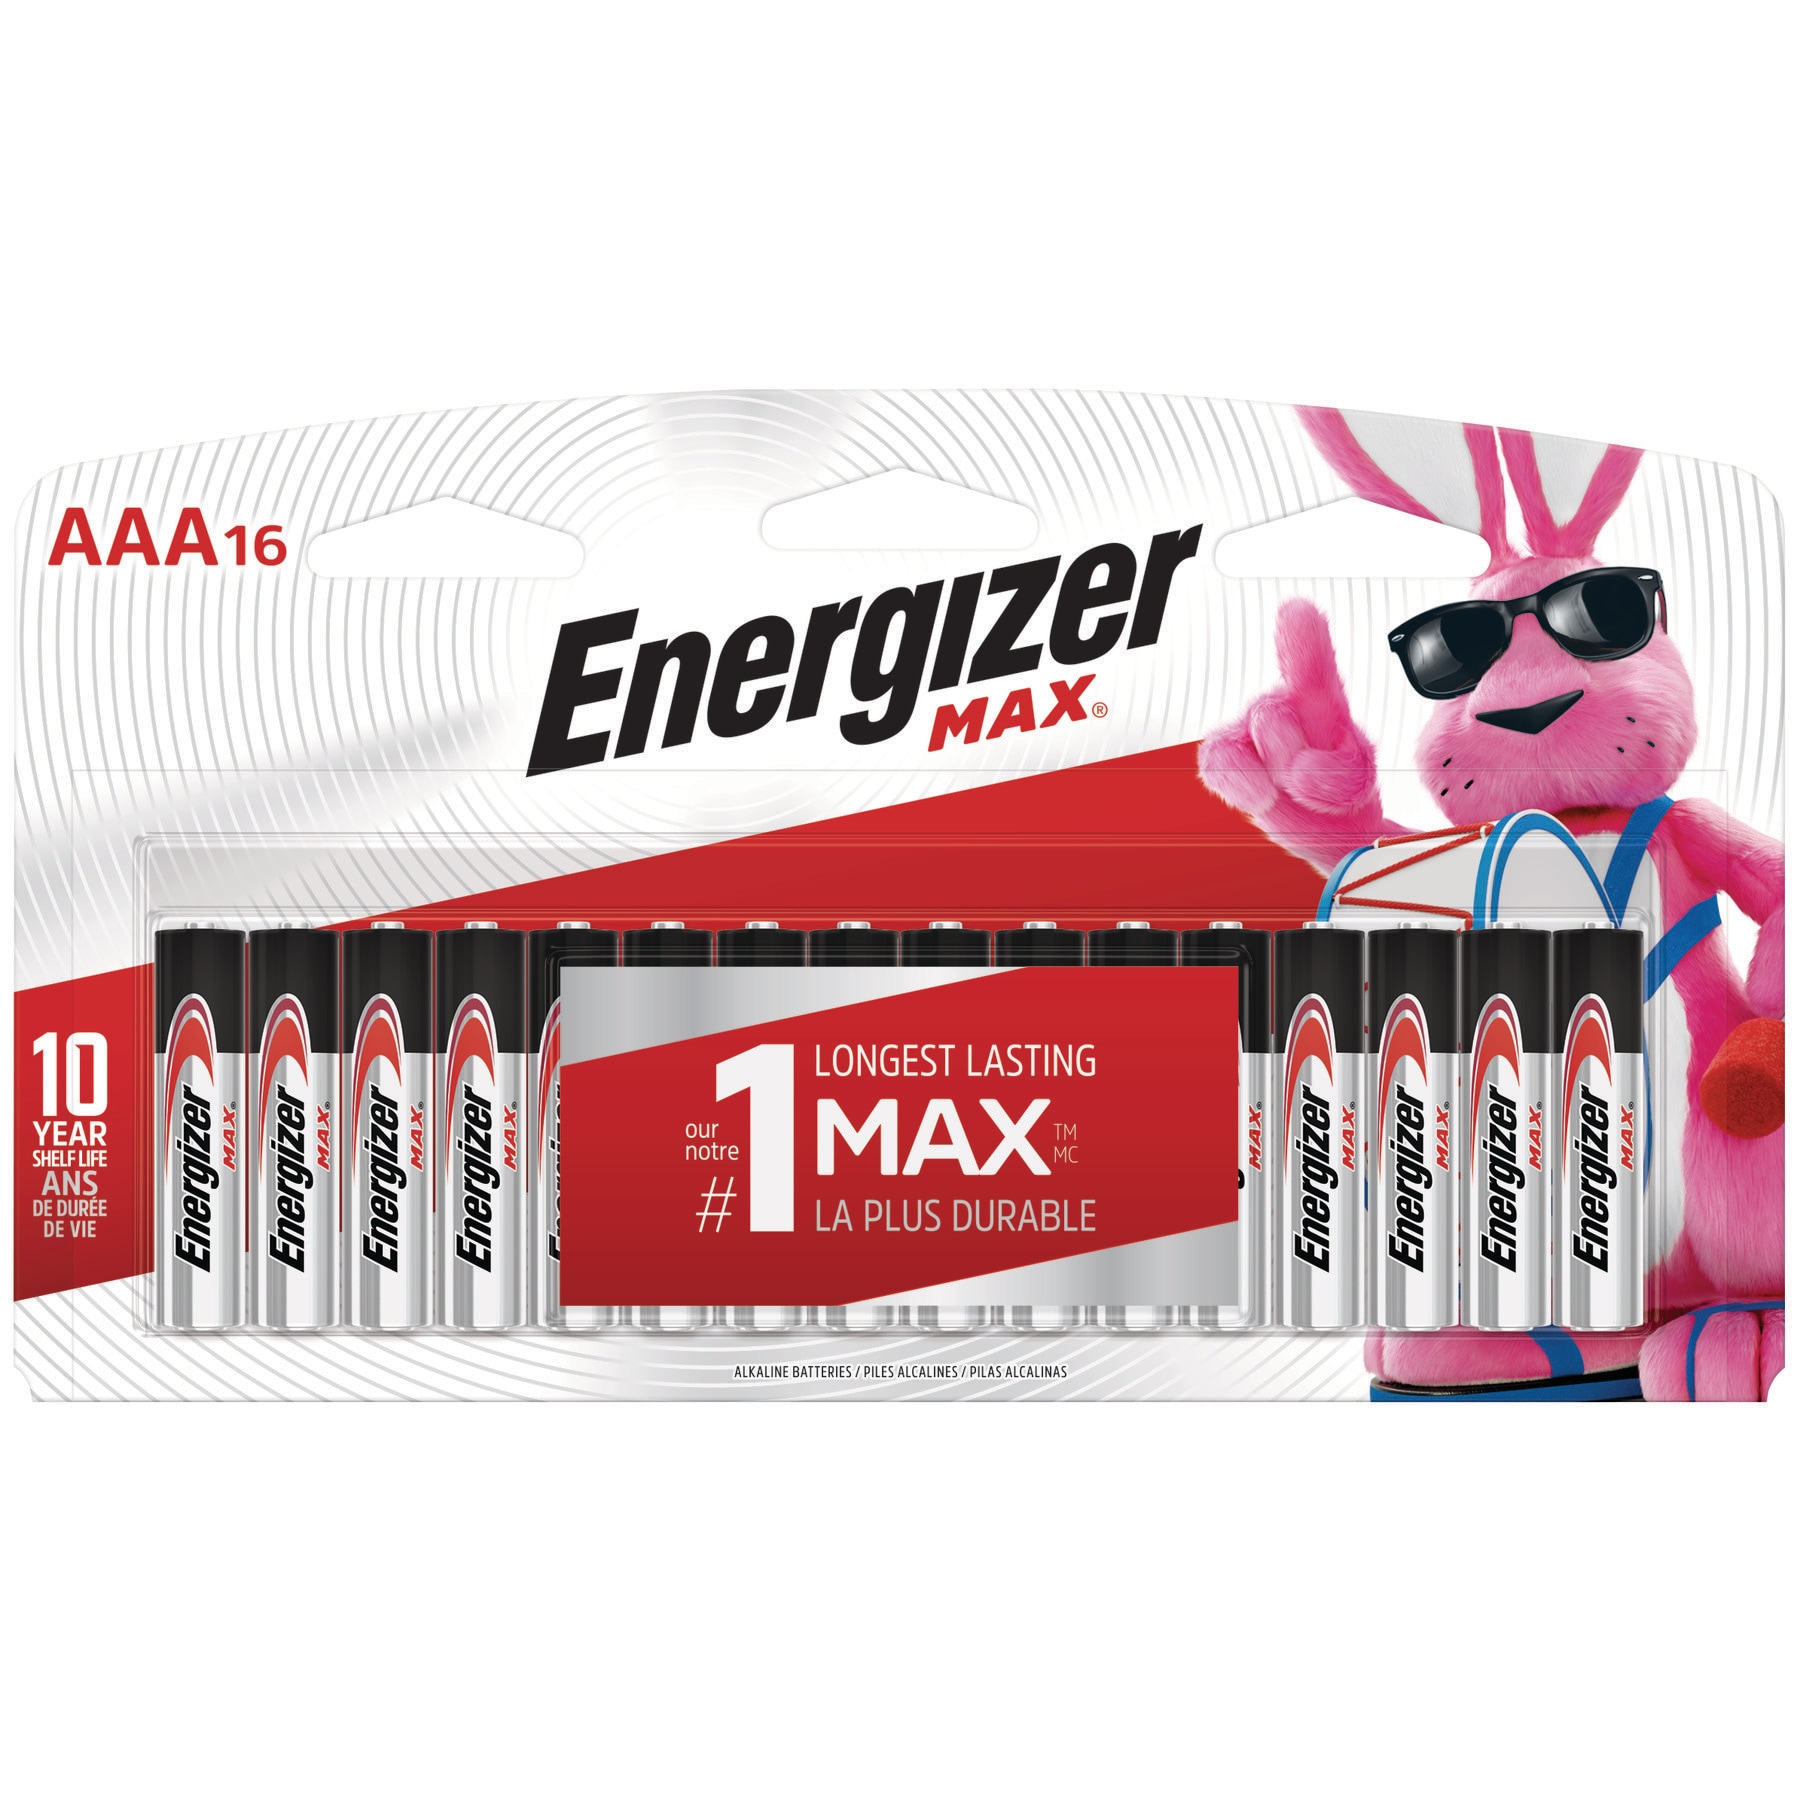 Energizer MAX Alkaline AA Batteries (36-Pack) at